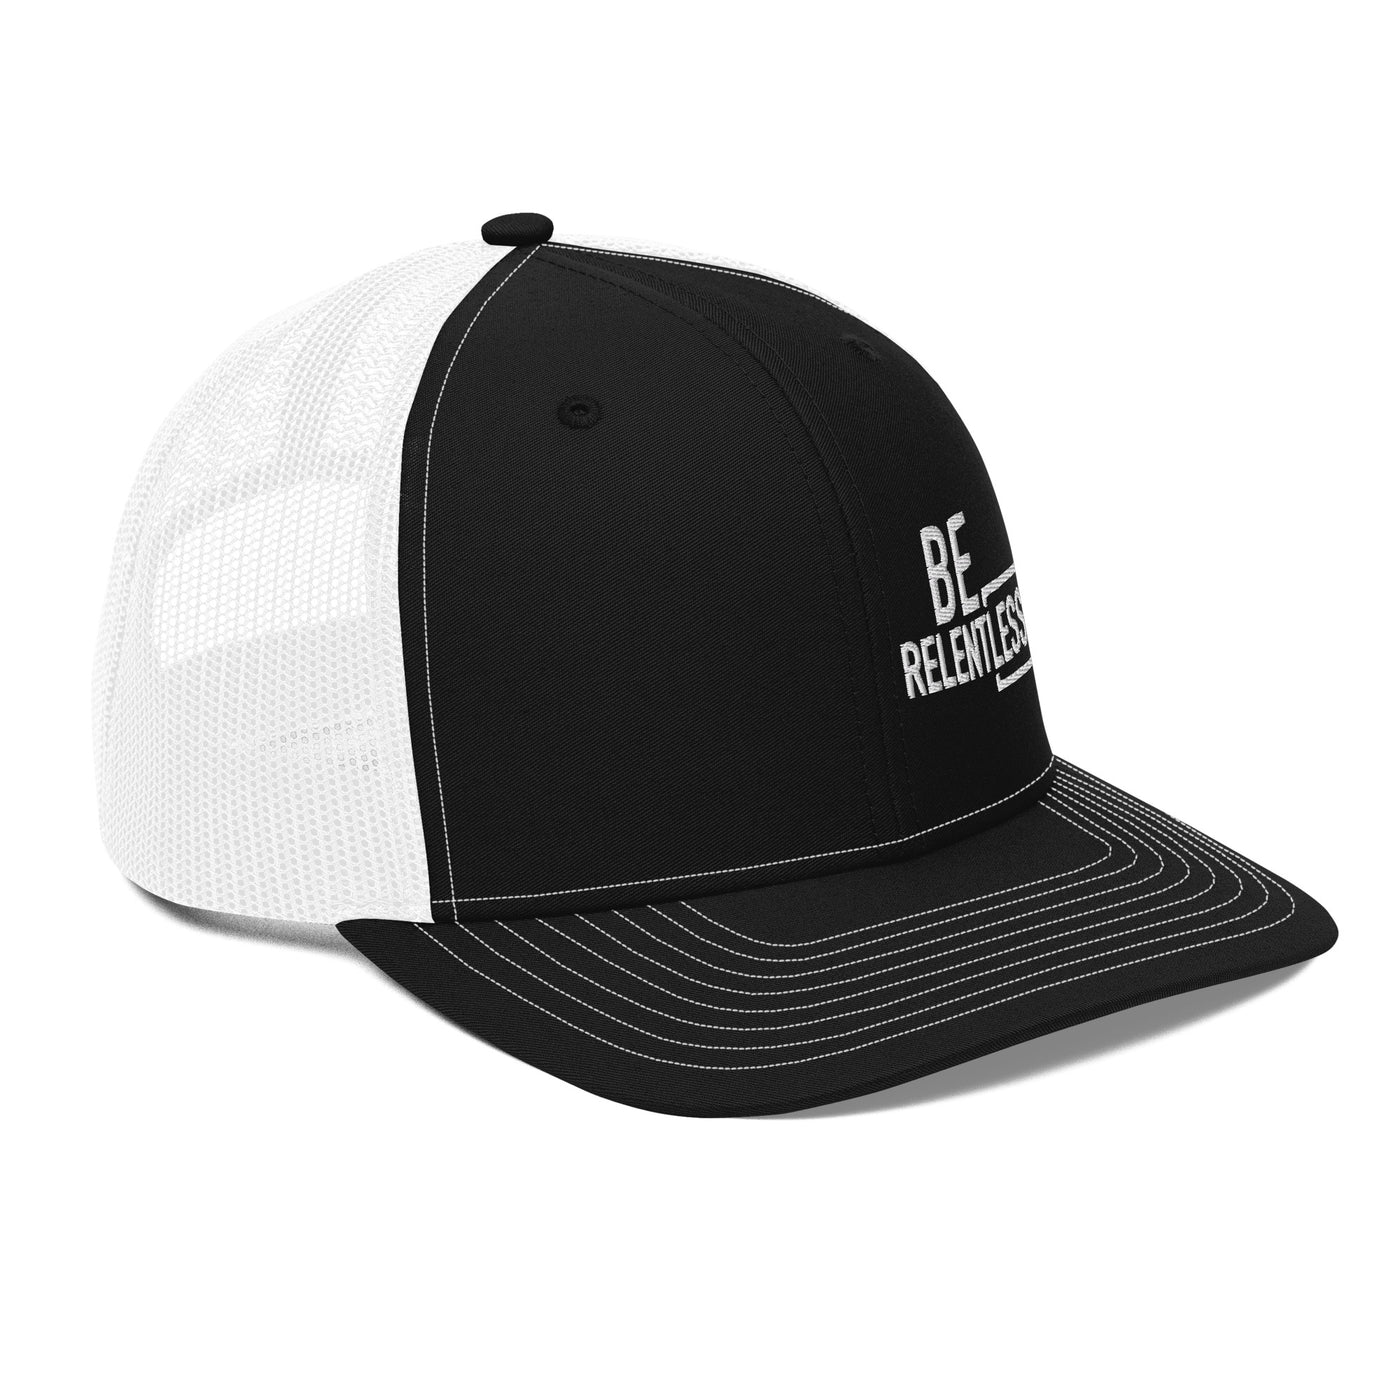 Angled View of Black and White Be Relentless Embroidered Trucker Cap